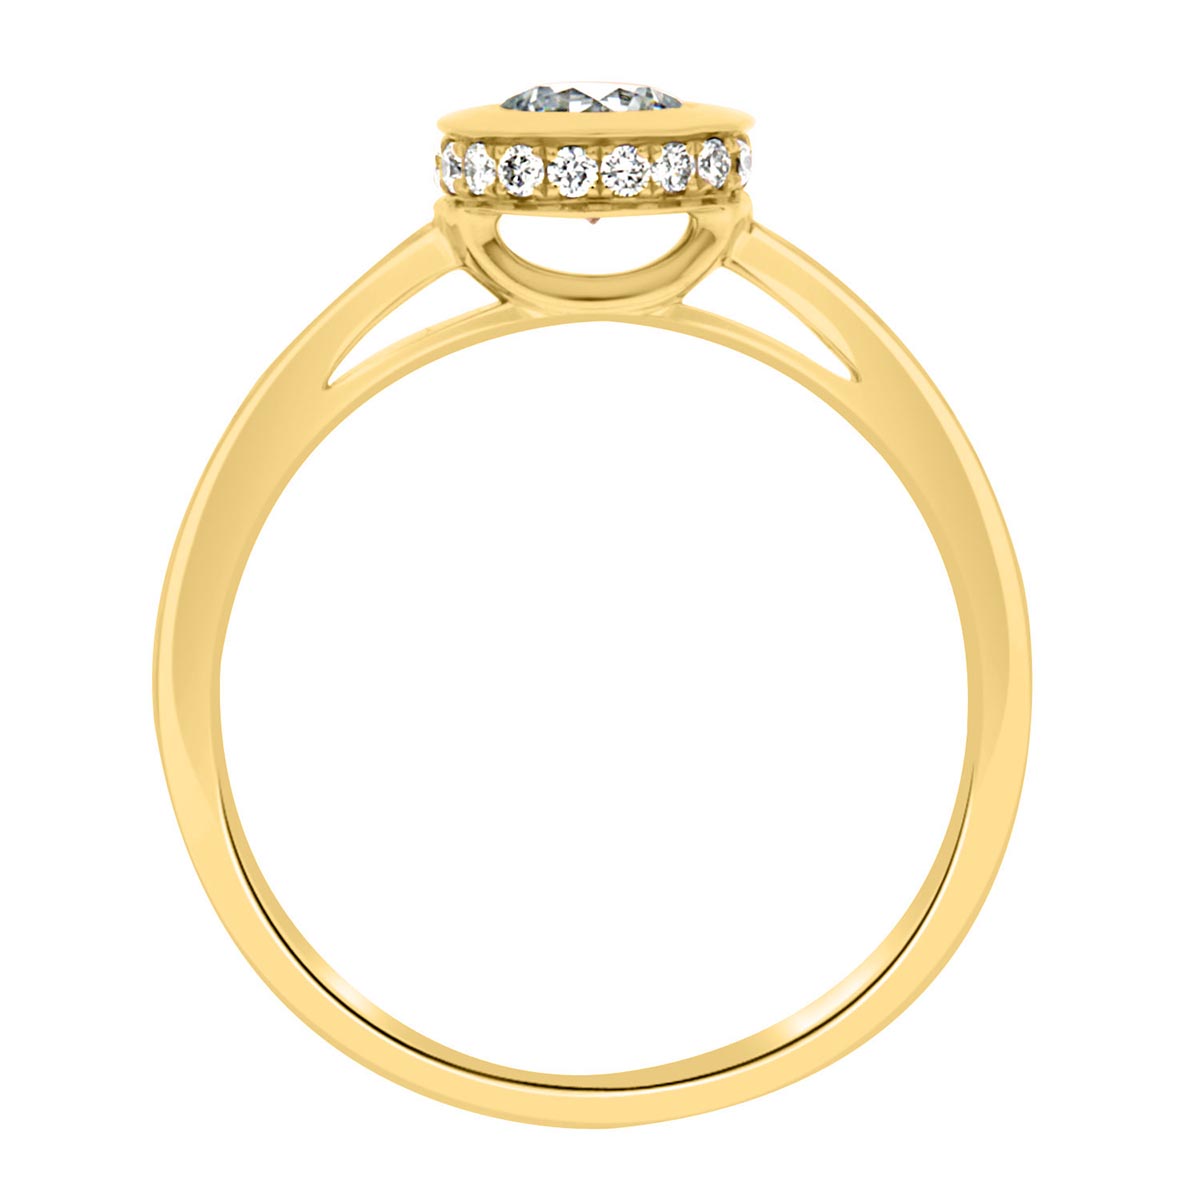 Bezel Engagement Ring made of yellow gold and diamonds, in a verticle position, against a white backgrount